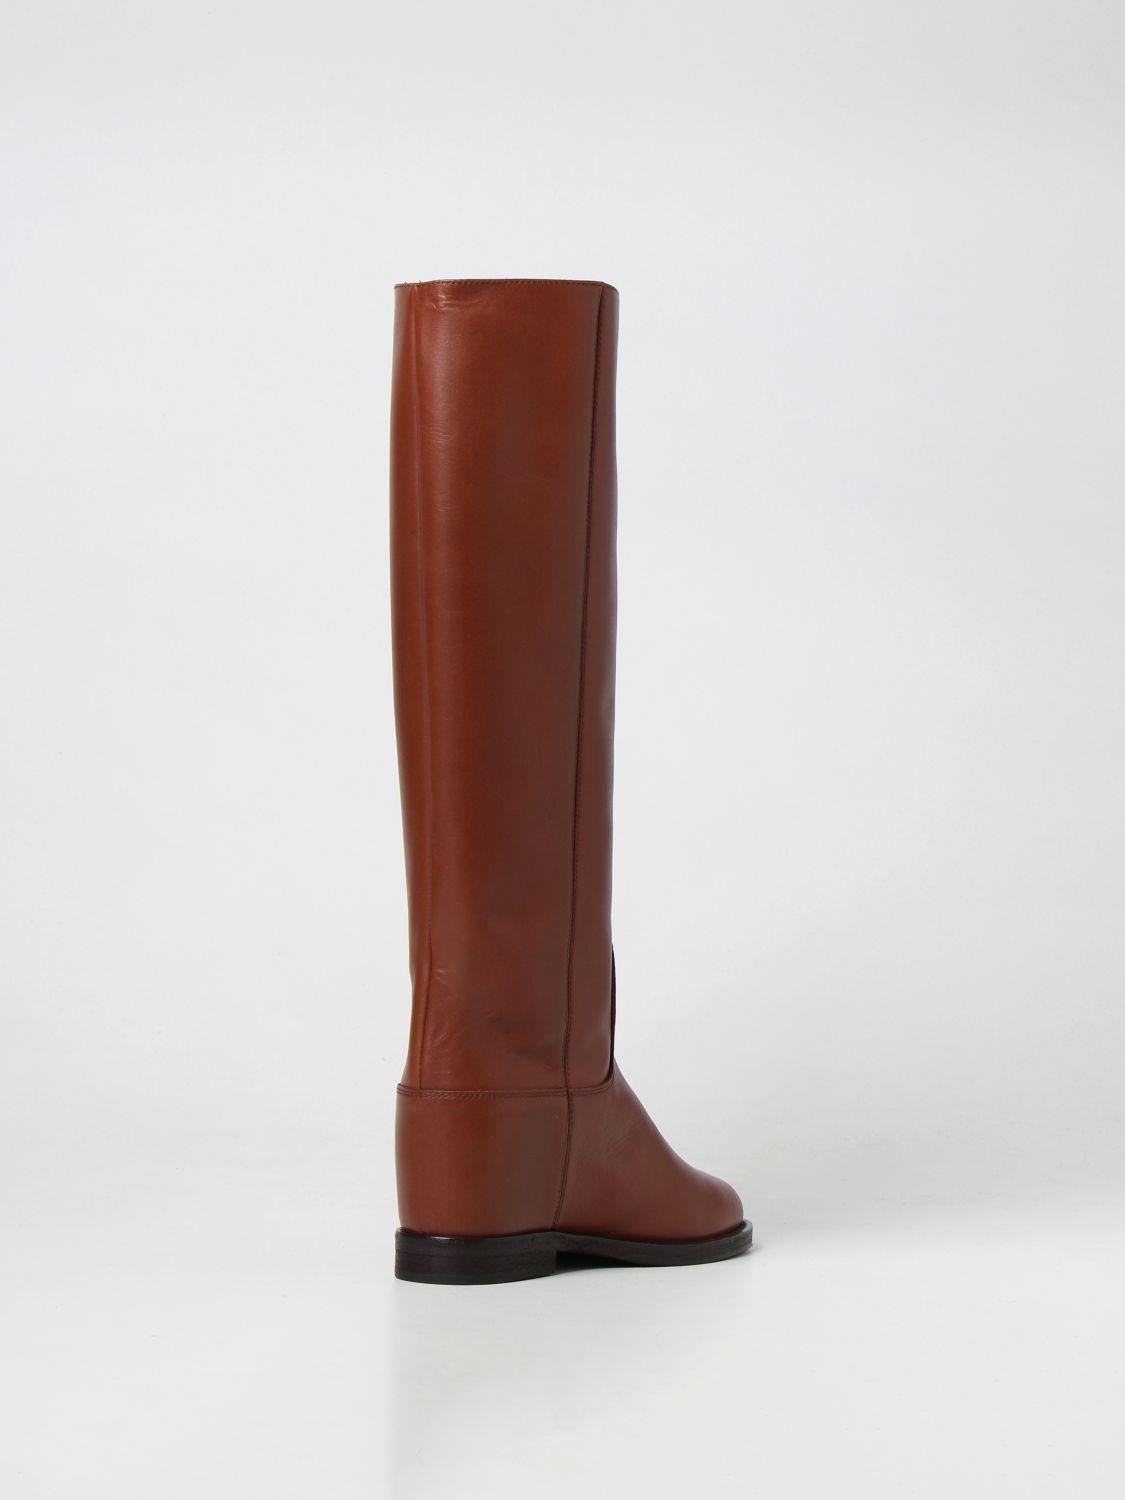 hoop Kosciuszko fluweel Via Roma 15 Outlet: boots for woman - Leather | Via Roma 15 boots 2568  online on GIGLIO.COM